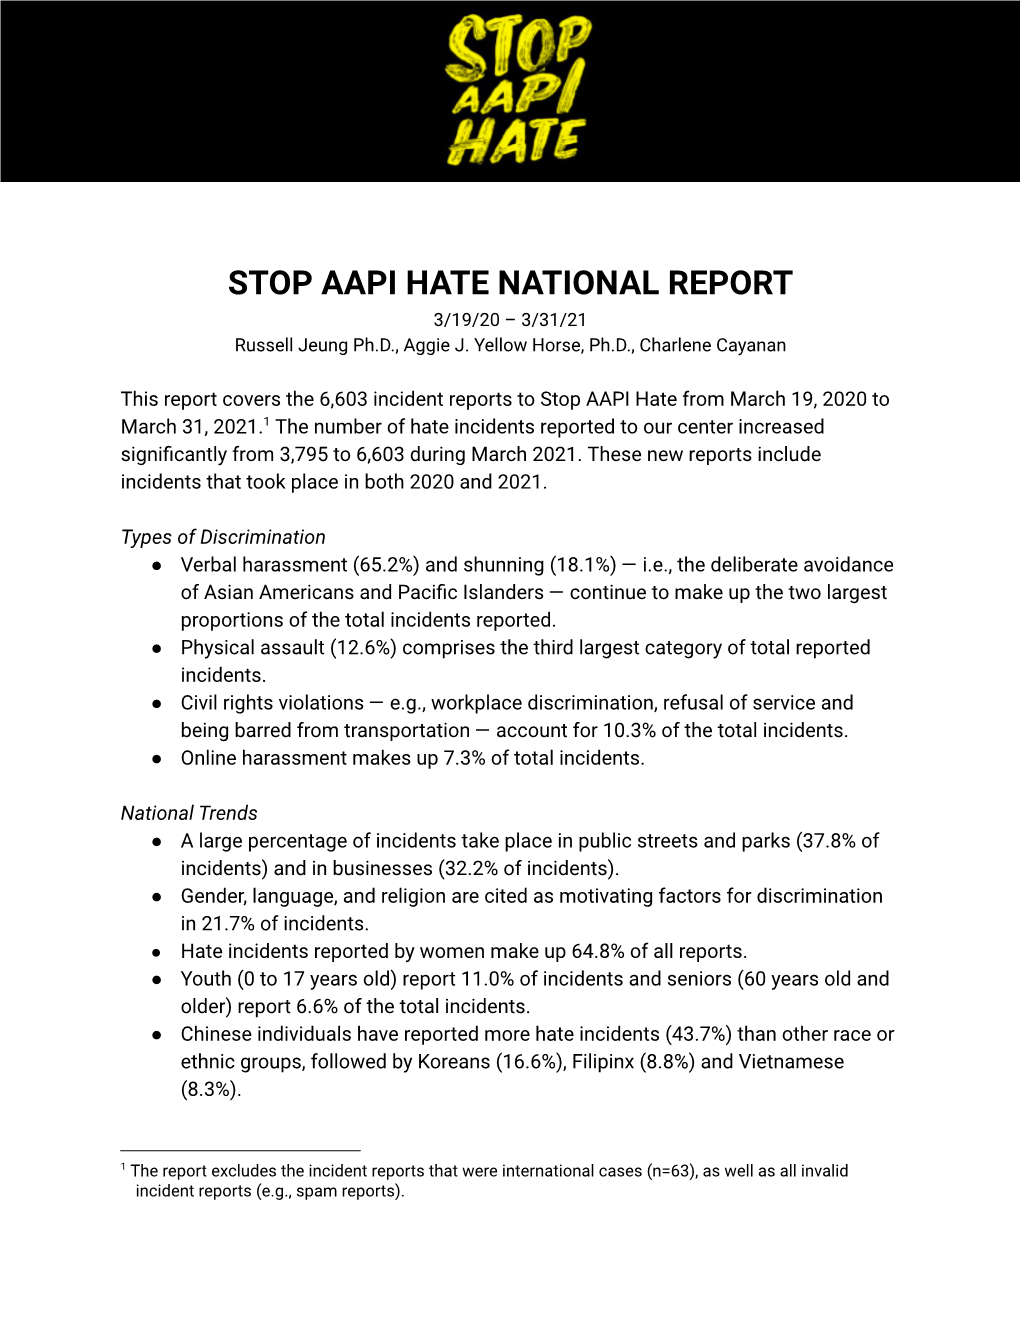 2021-05-06 Stop AAPI Hate National Report.Docx